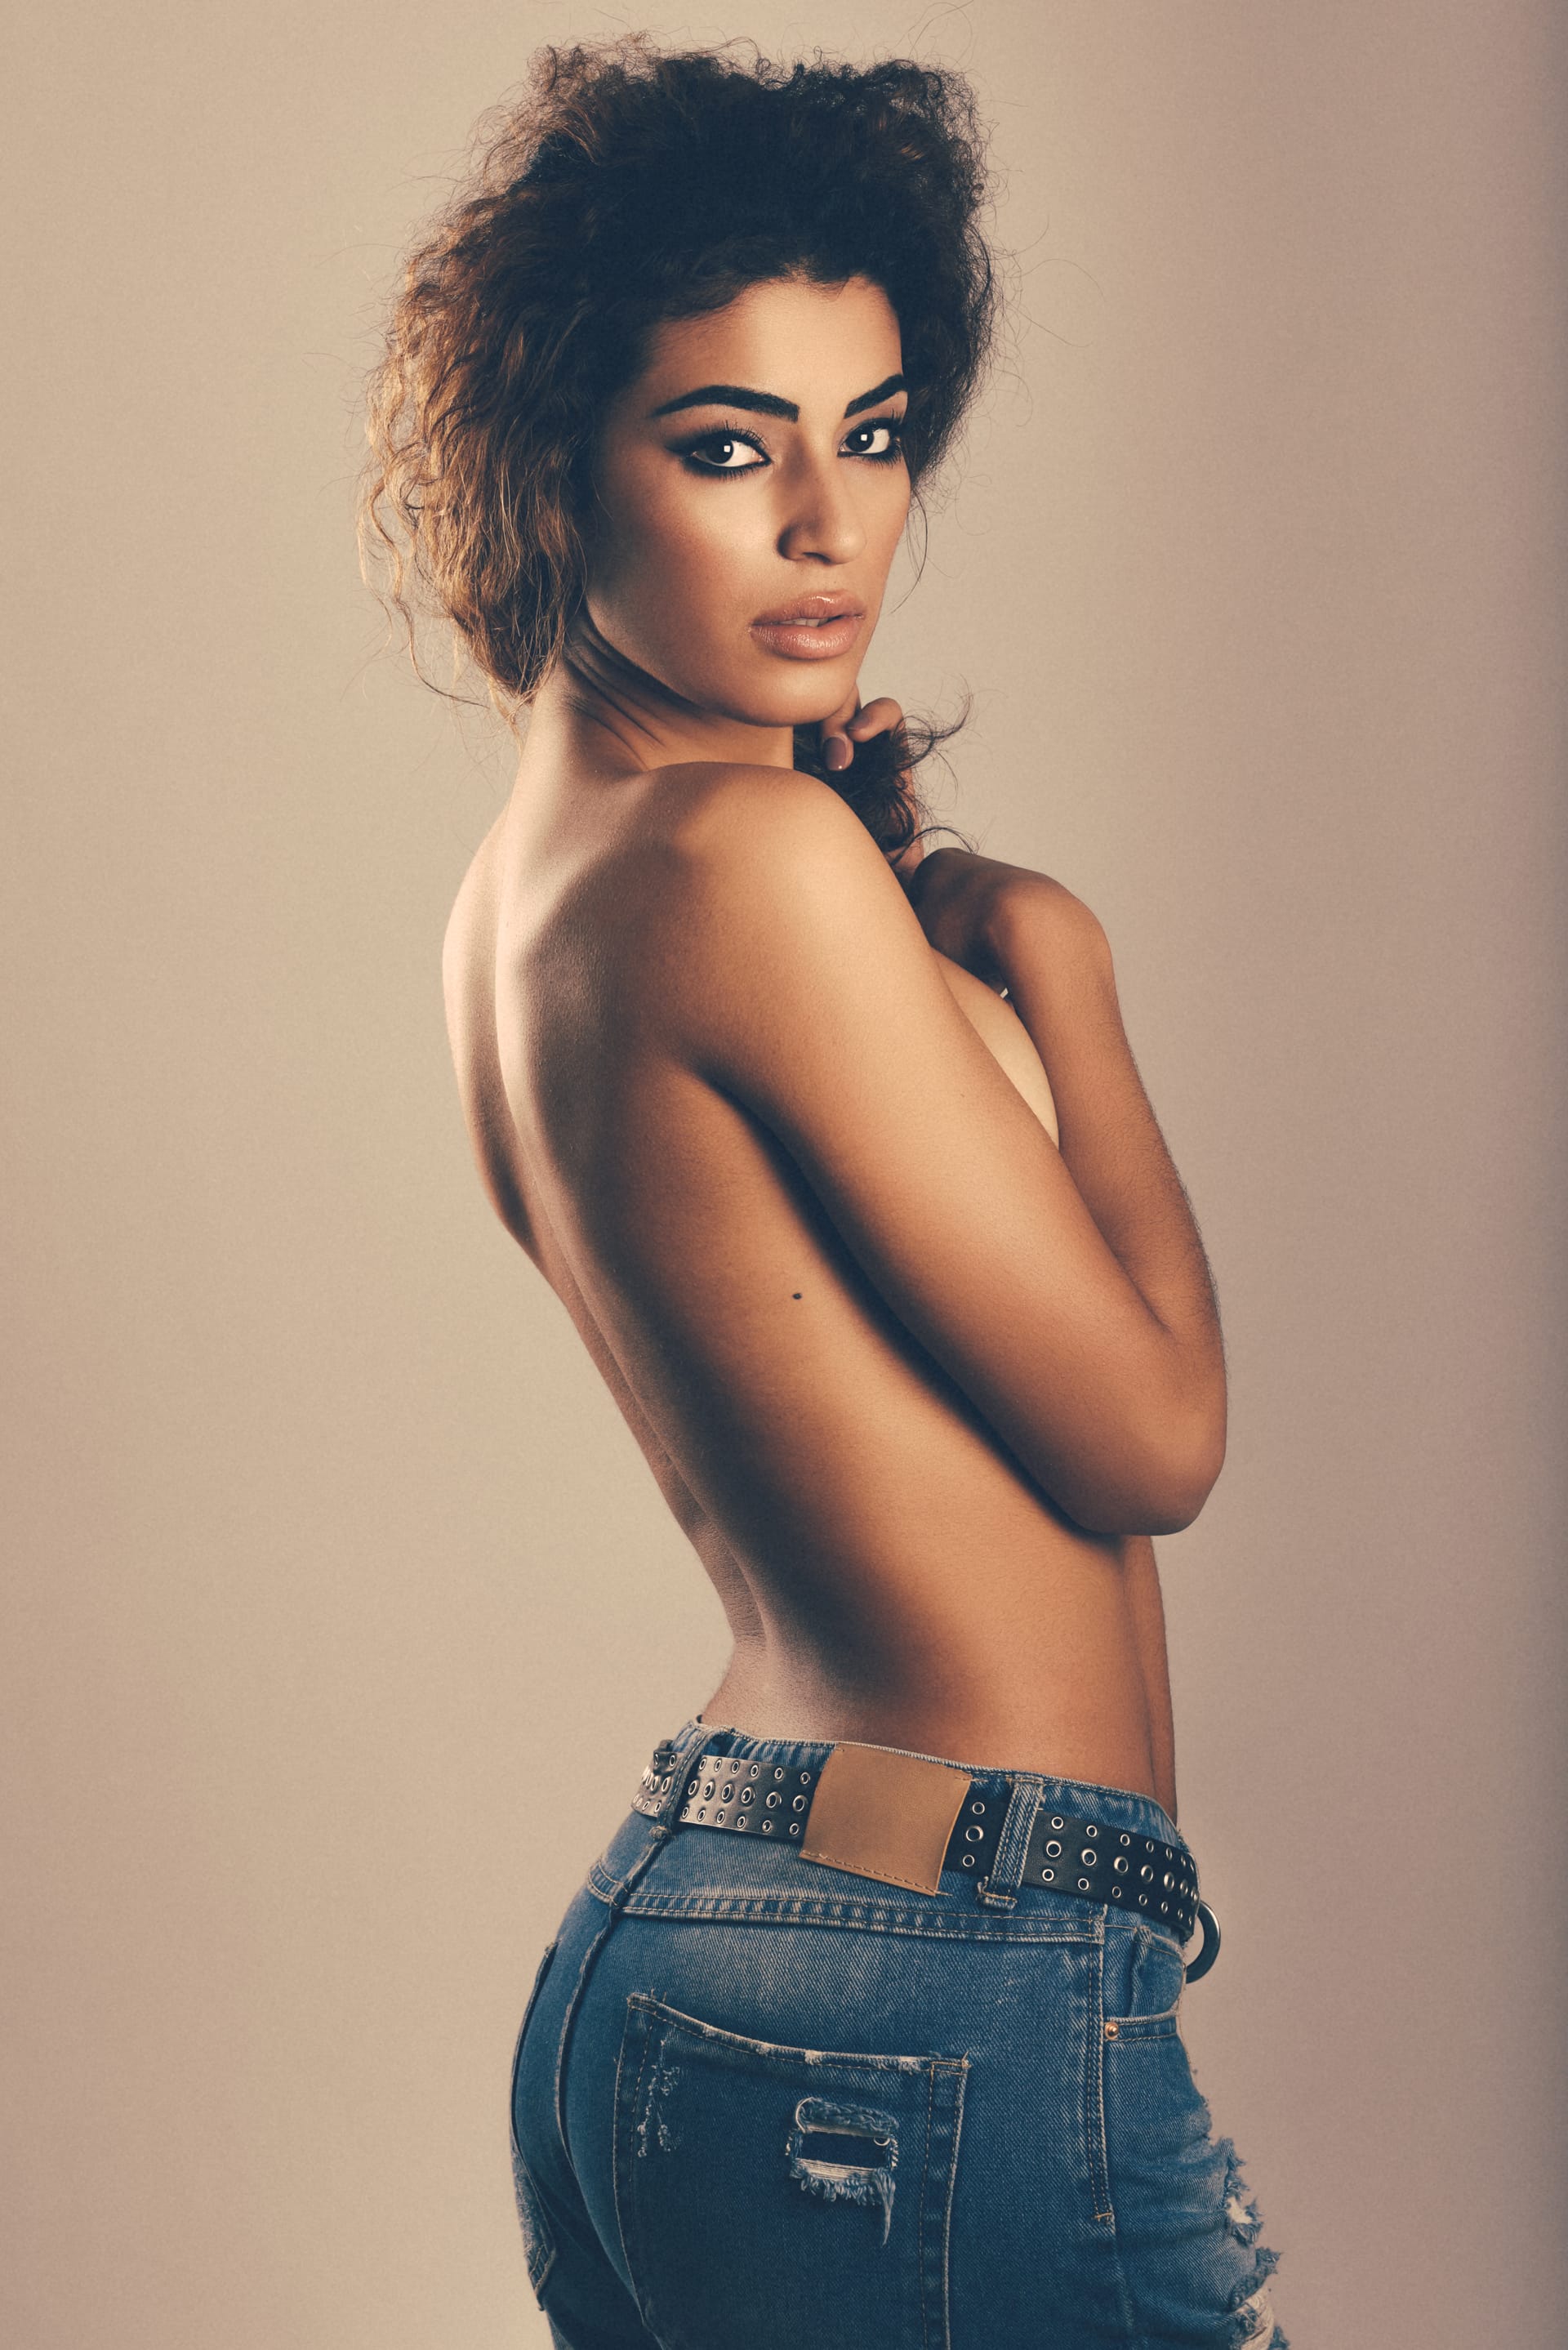 Young woman with beautiful back wearing blue jeans beautiful female models photos